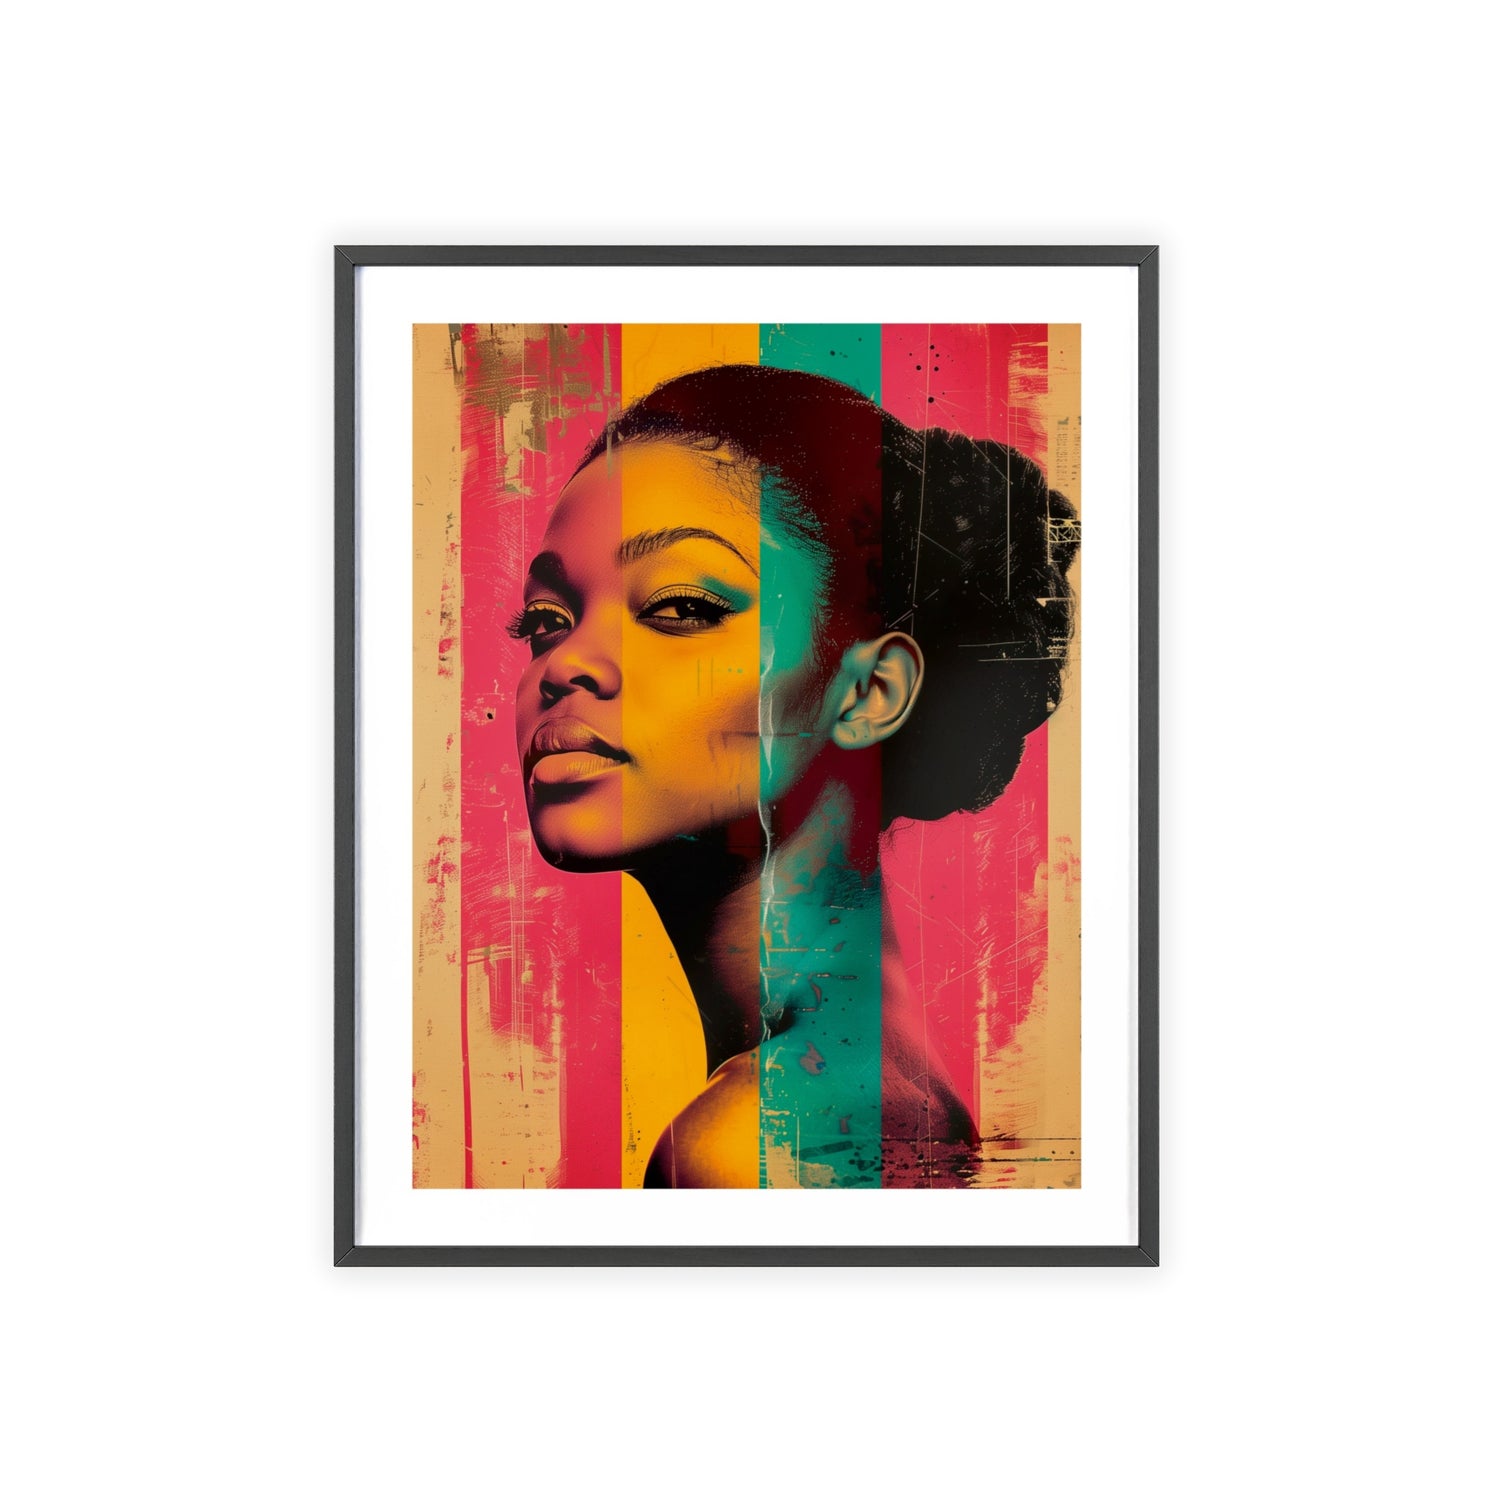 Global Glamour: Iconic Women in Pop Art wall art poster featuring vibrant and empowering images of women from around the world